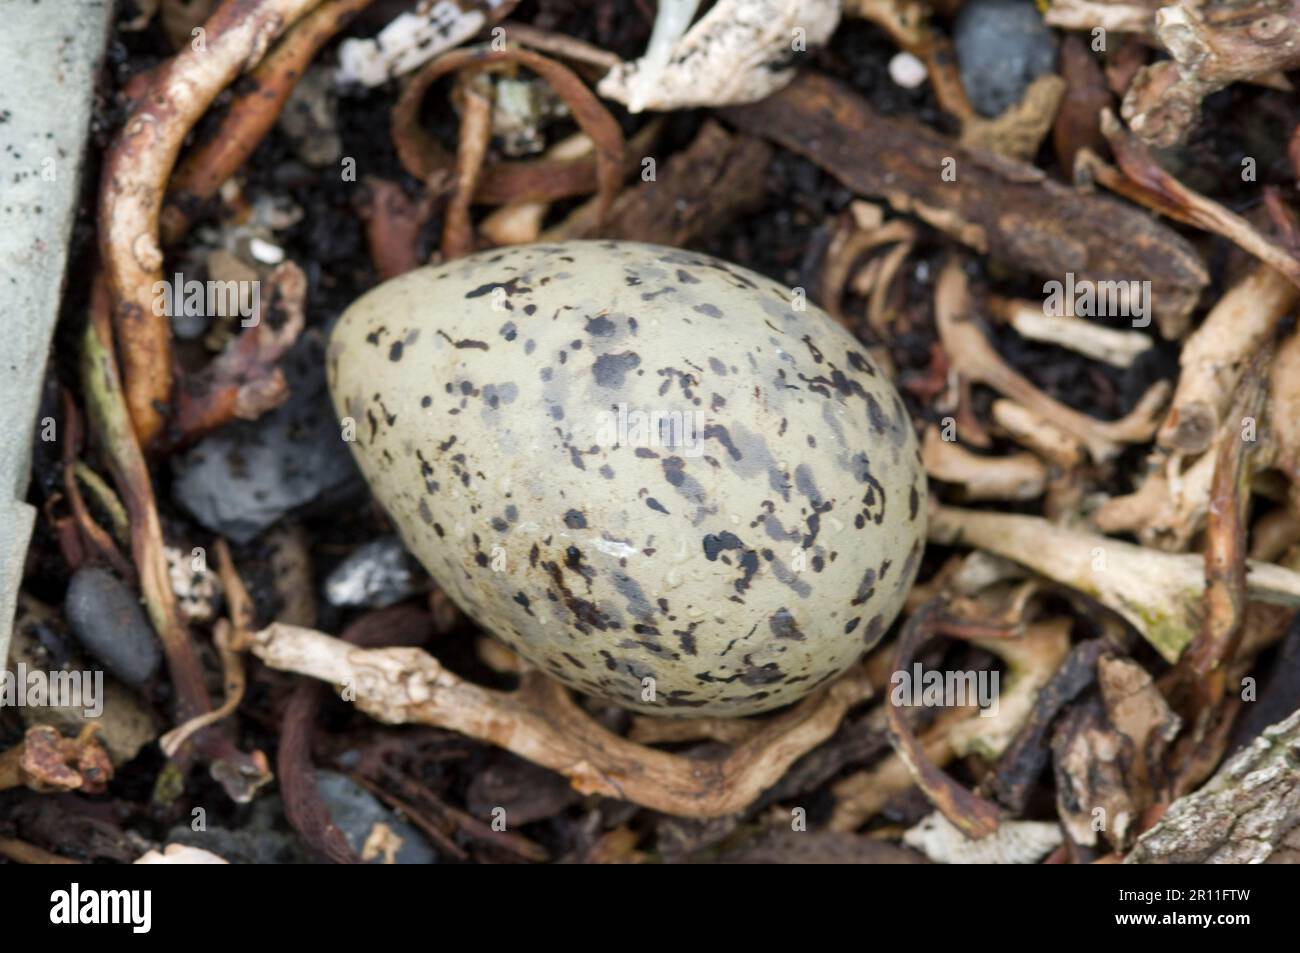 South American south american tern (Sterna hirundinacea) Close-up of an egg in the nest, Sea Lion Island, East Falkland Stock Photo